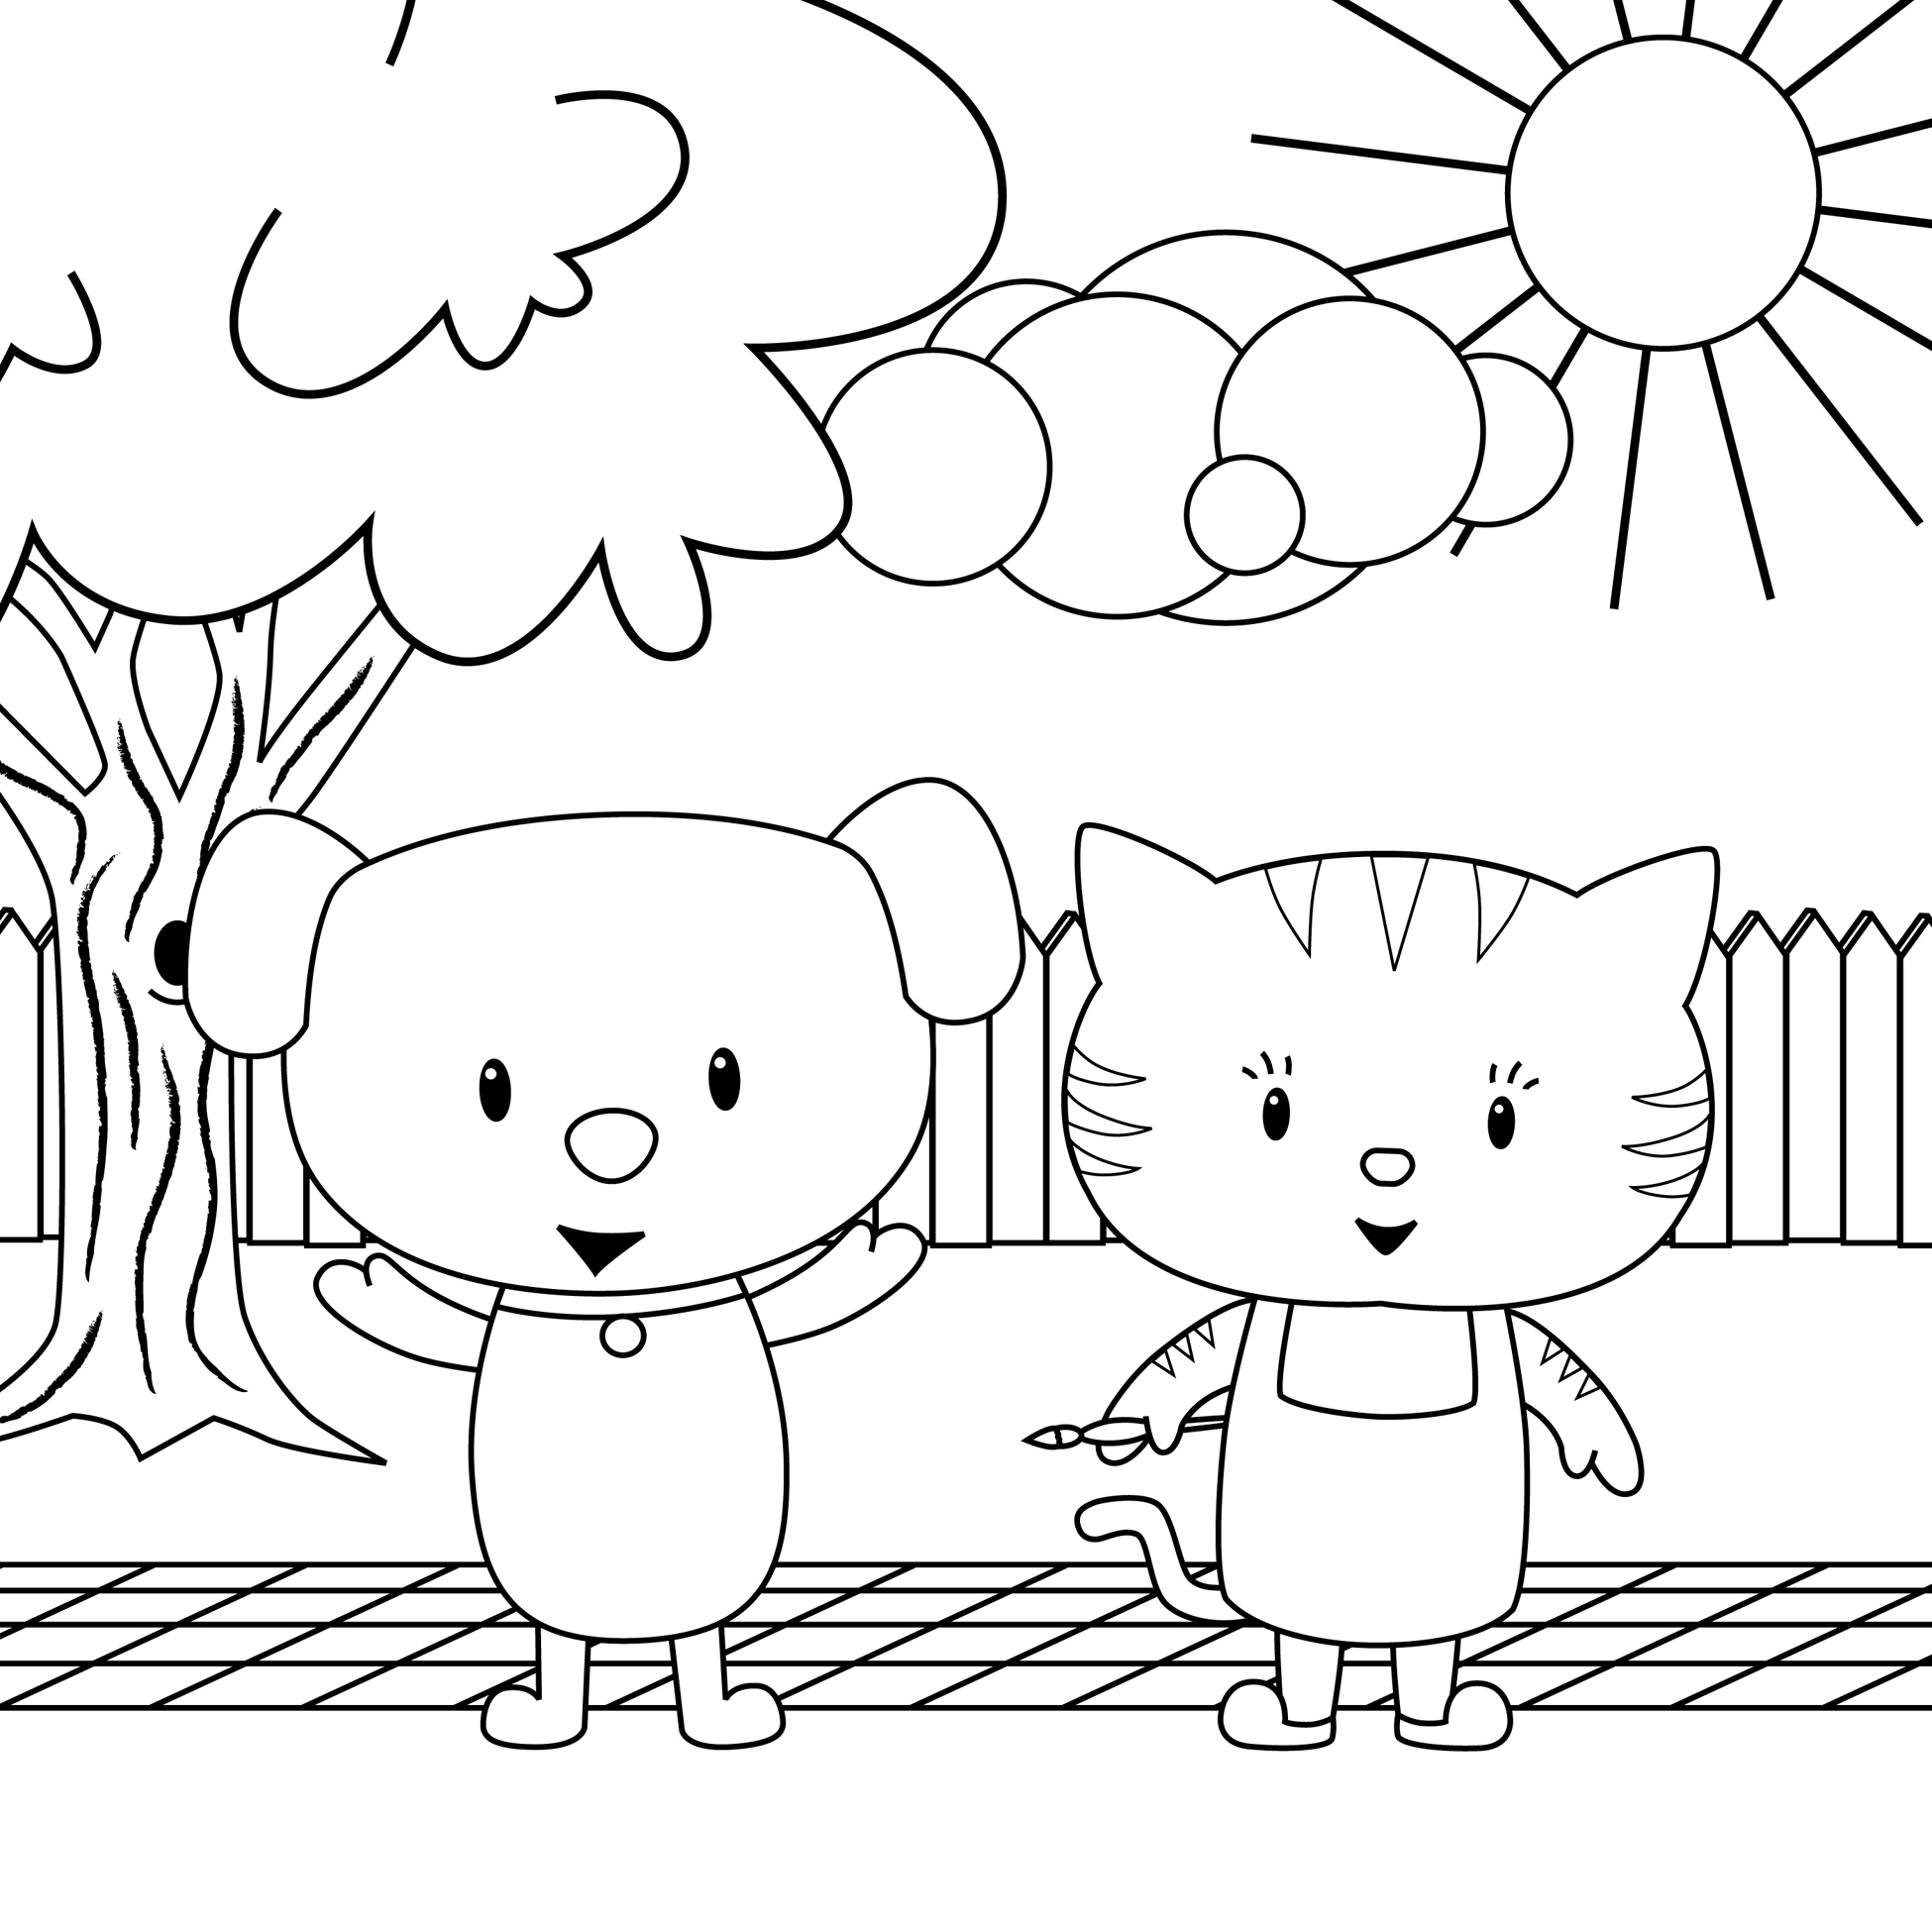 Cat And Dog Coloring Pages Free at GetDrawings | Free download